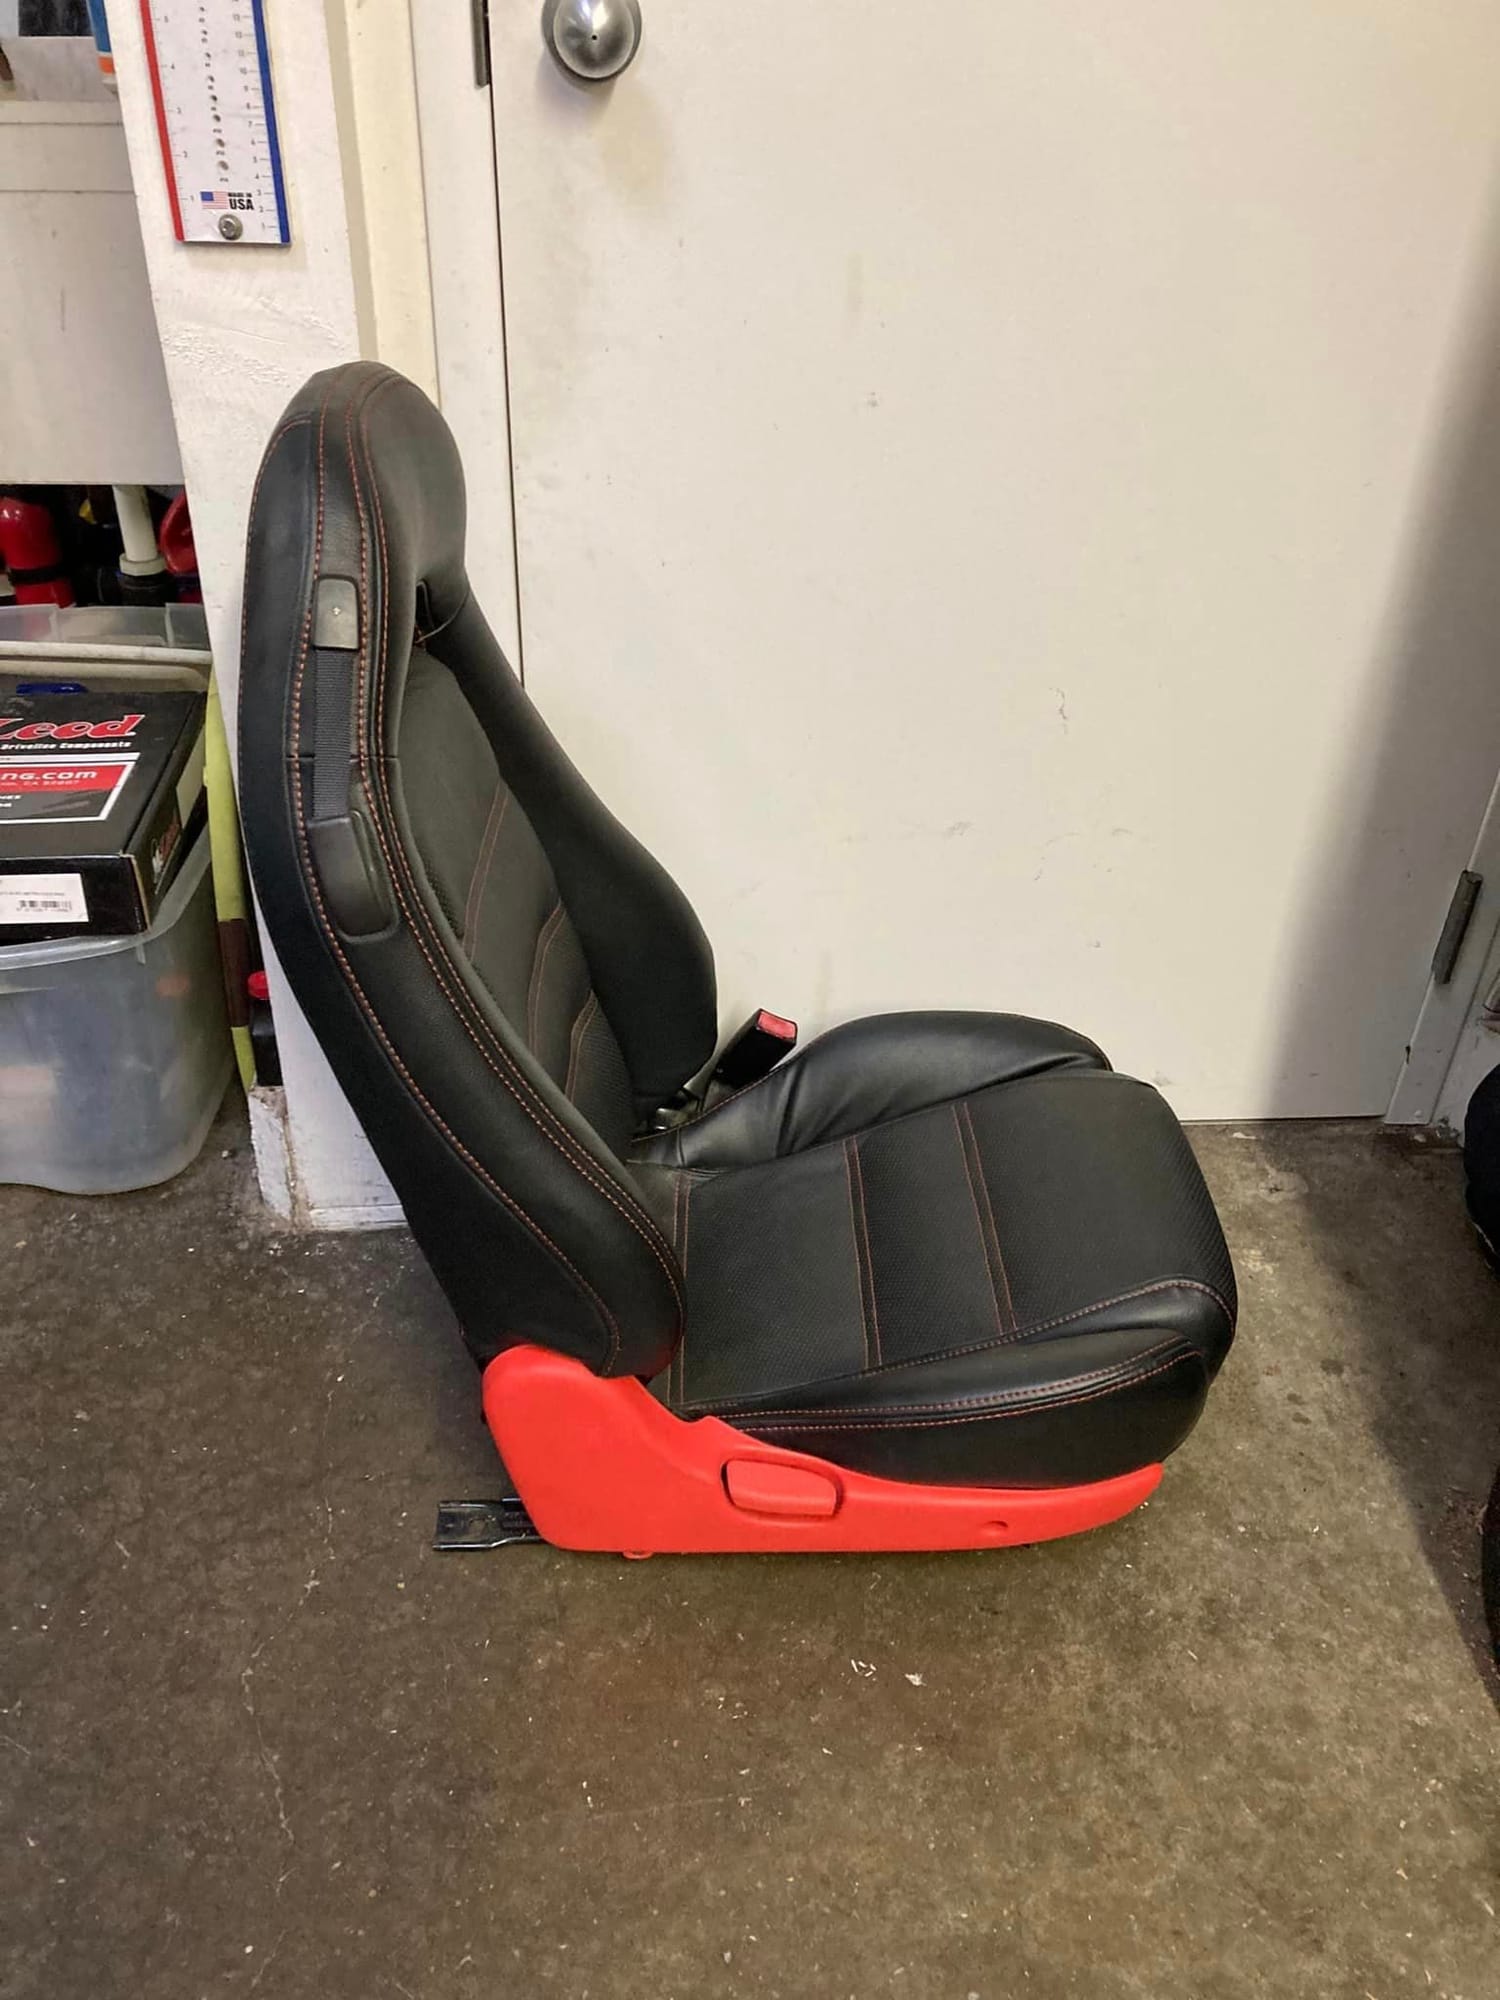 Interior/Upholstery - FD black seats recovered in black leather.... red stitching!  Very nice condition! - Used - San Ramon, CA 94583, United States